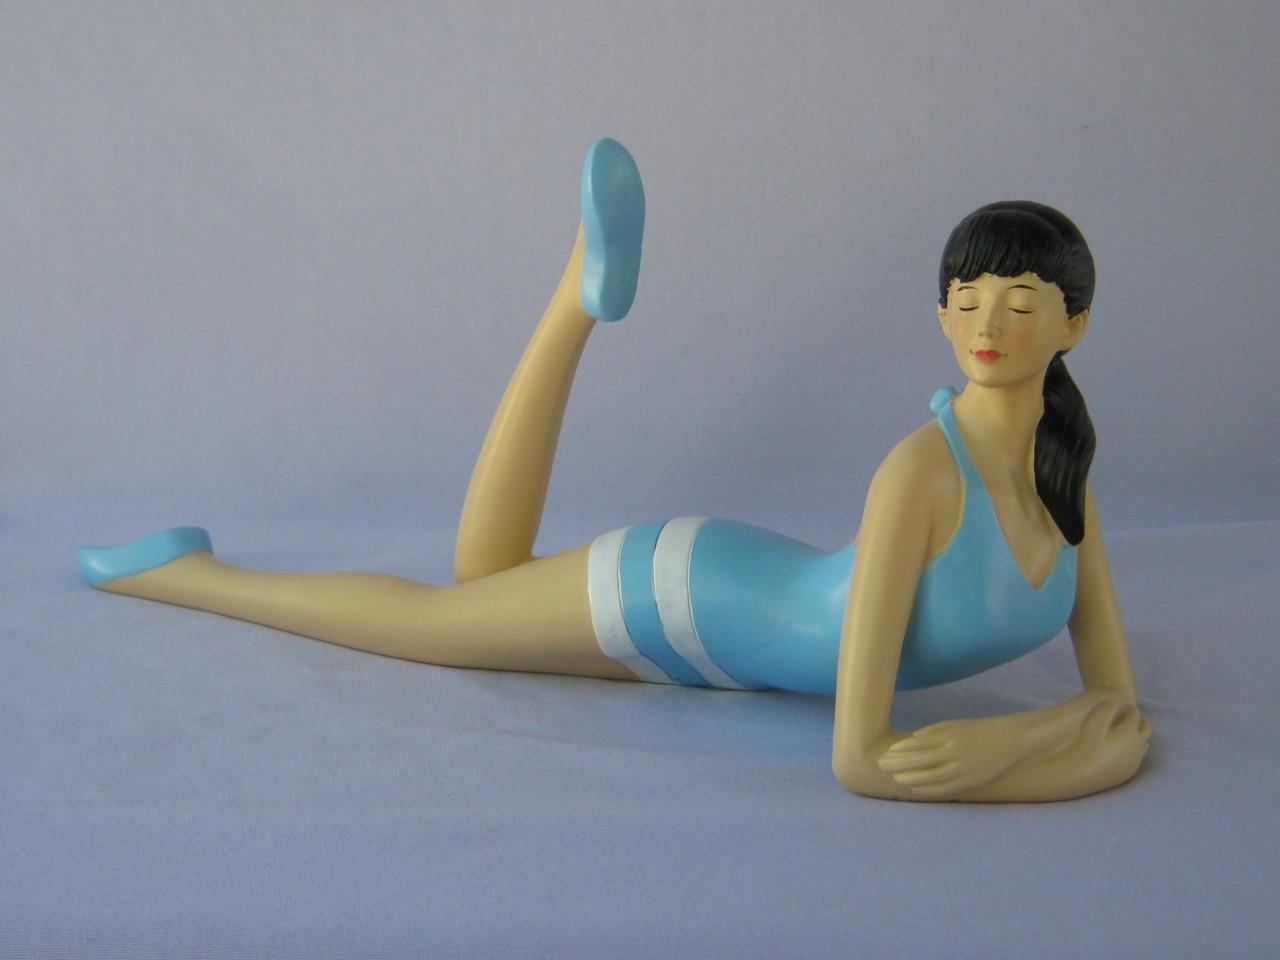 Superb Art Deco Bathing Beauty Very Detailed in Light Blue White Accents Risque